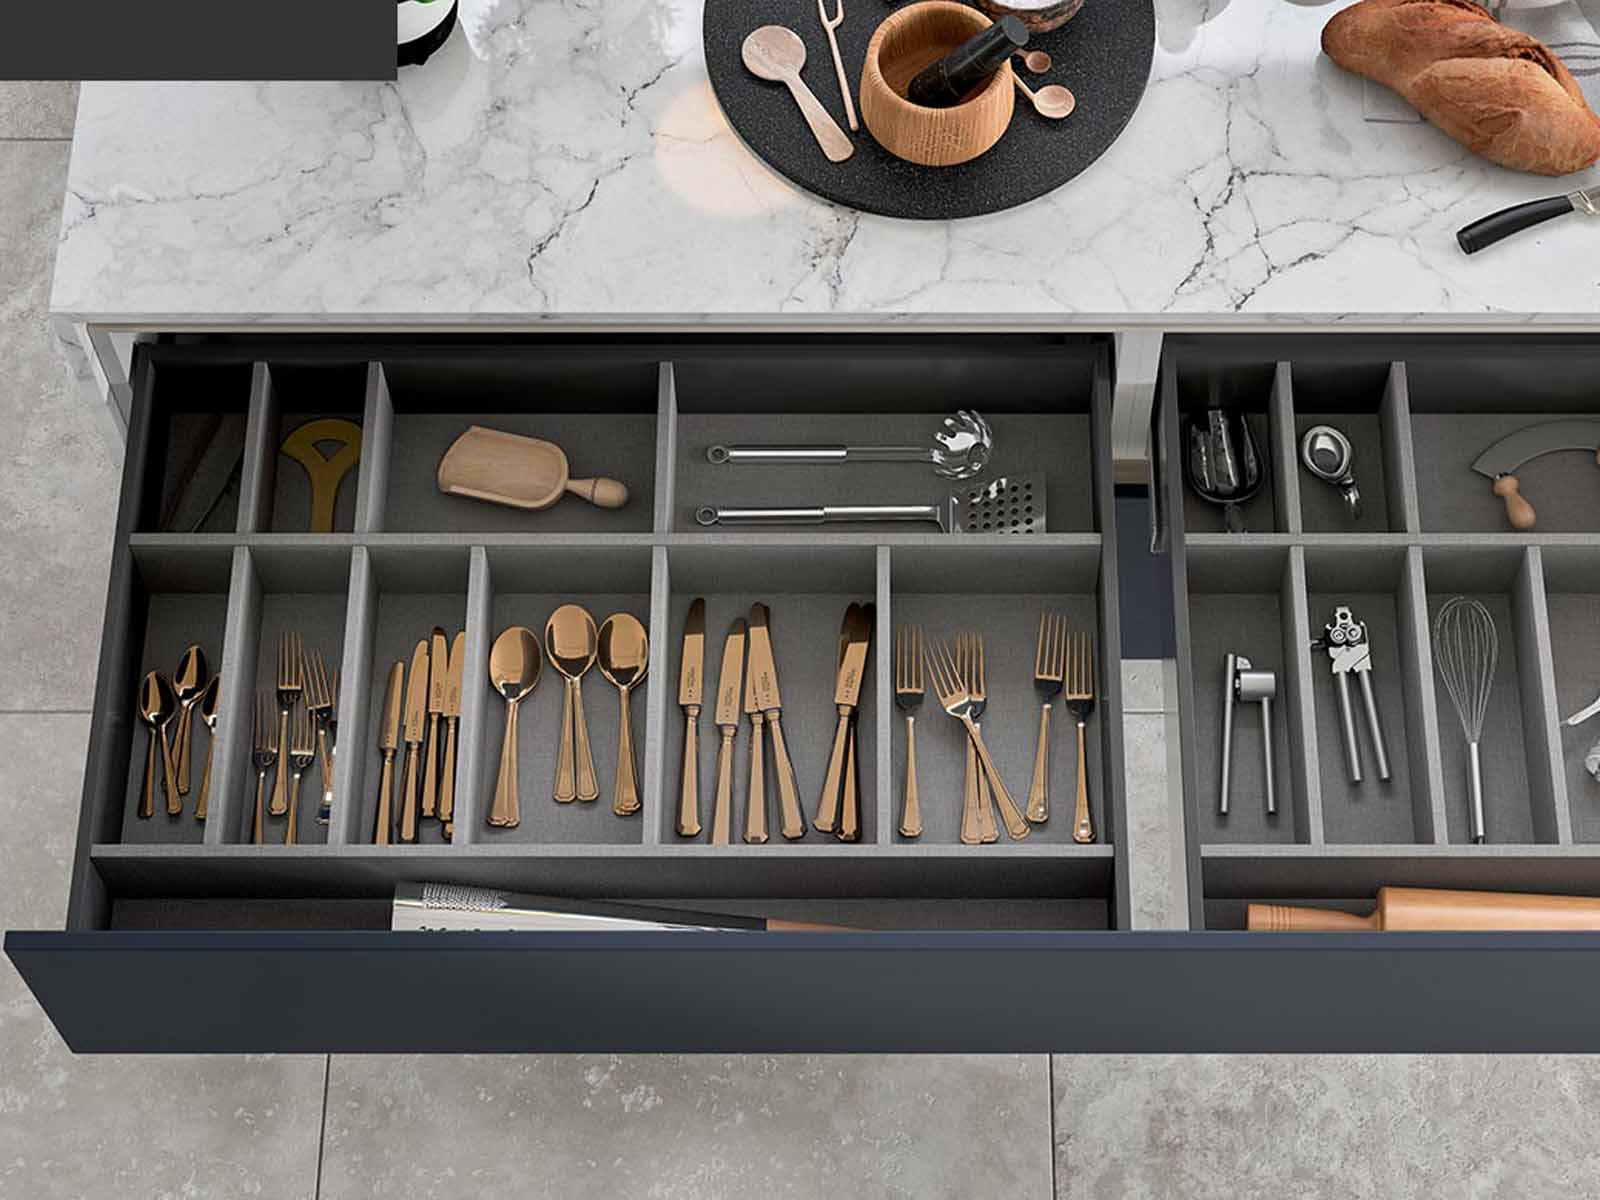 Minimalist kitchen drawers with handmade, wood-effect partitions